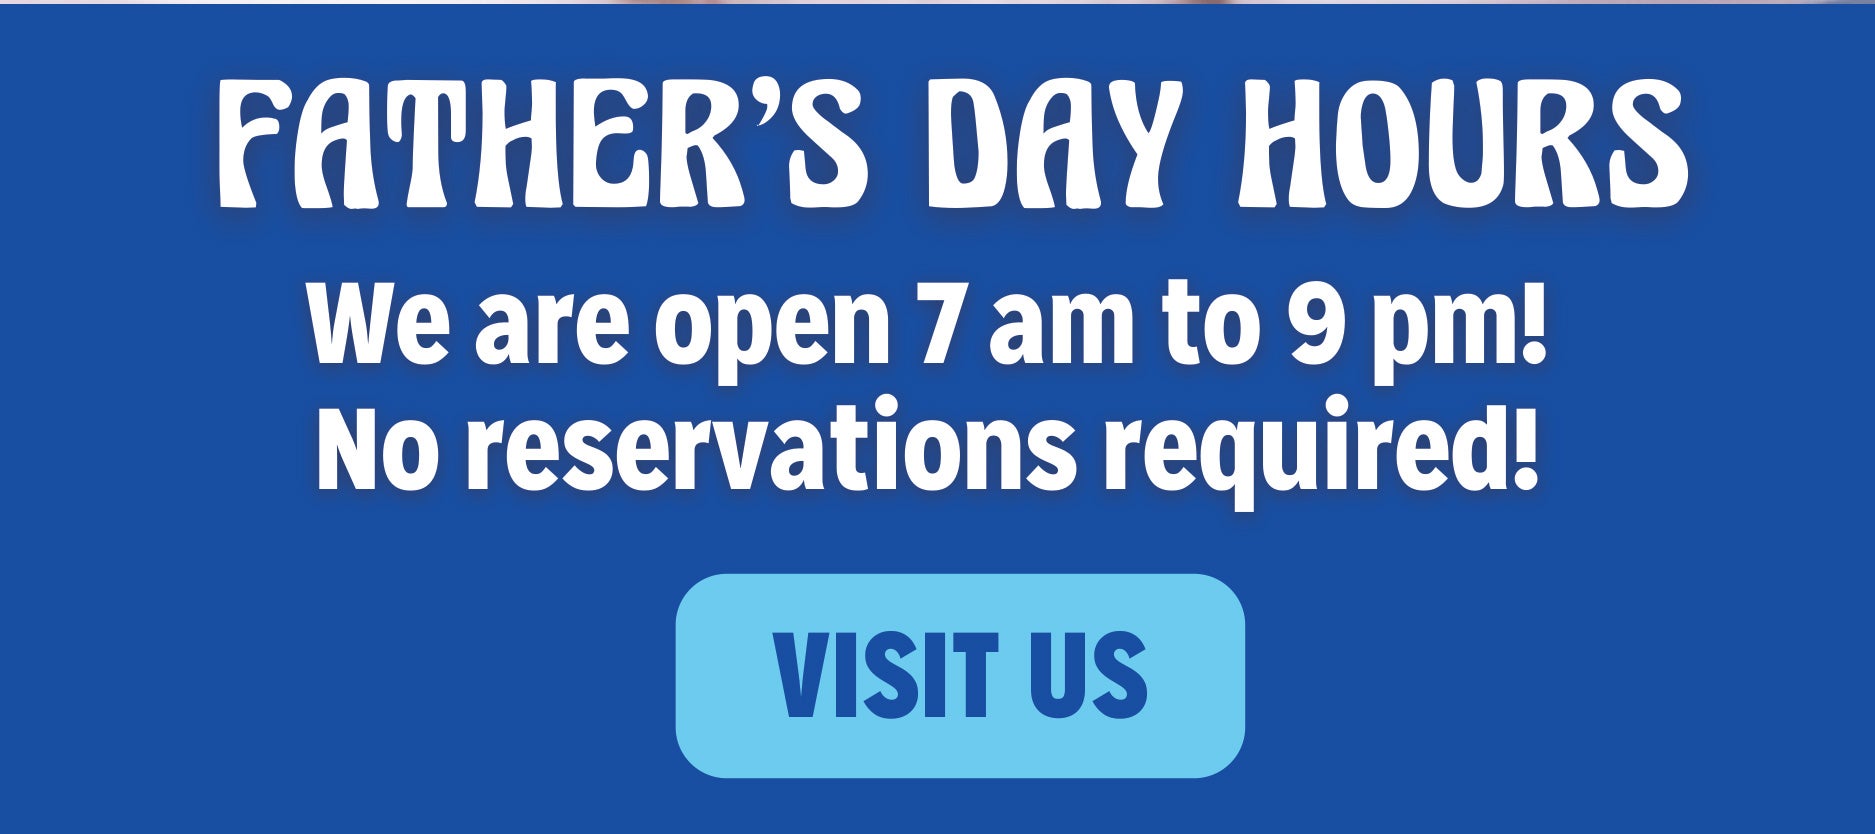 Father's Day Hours. We are open 7 am to 9 pm. No reservations required!